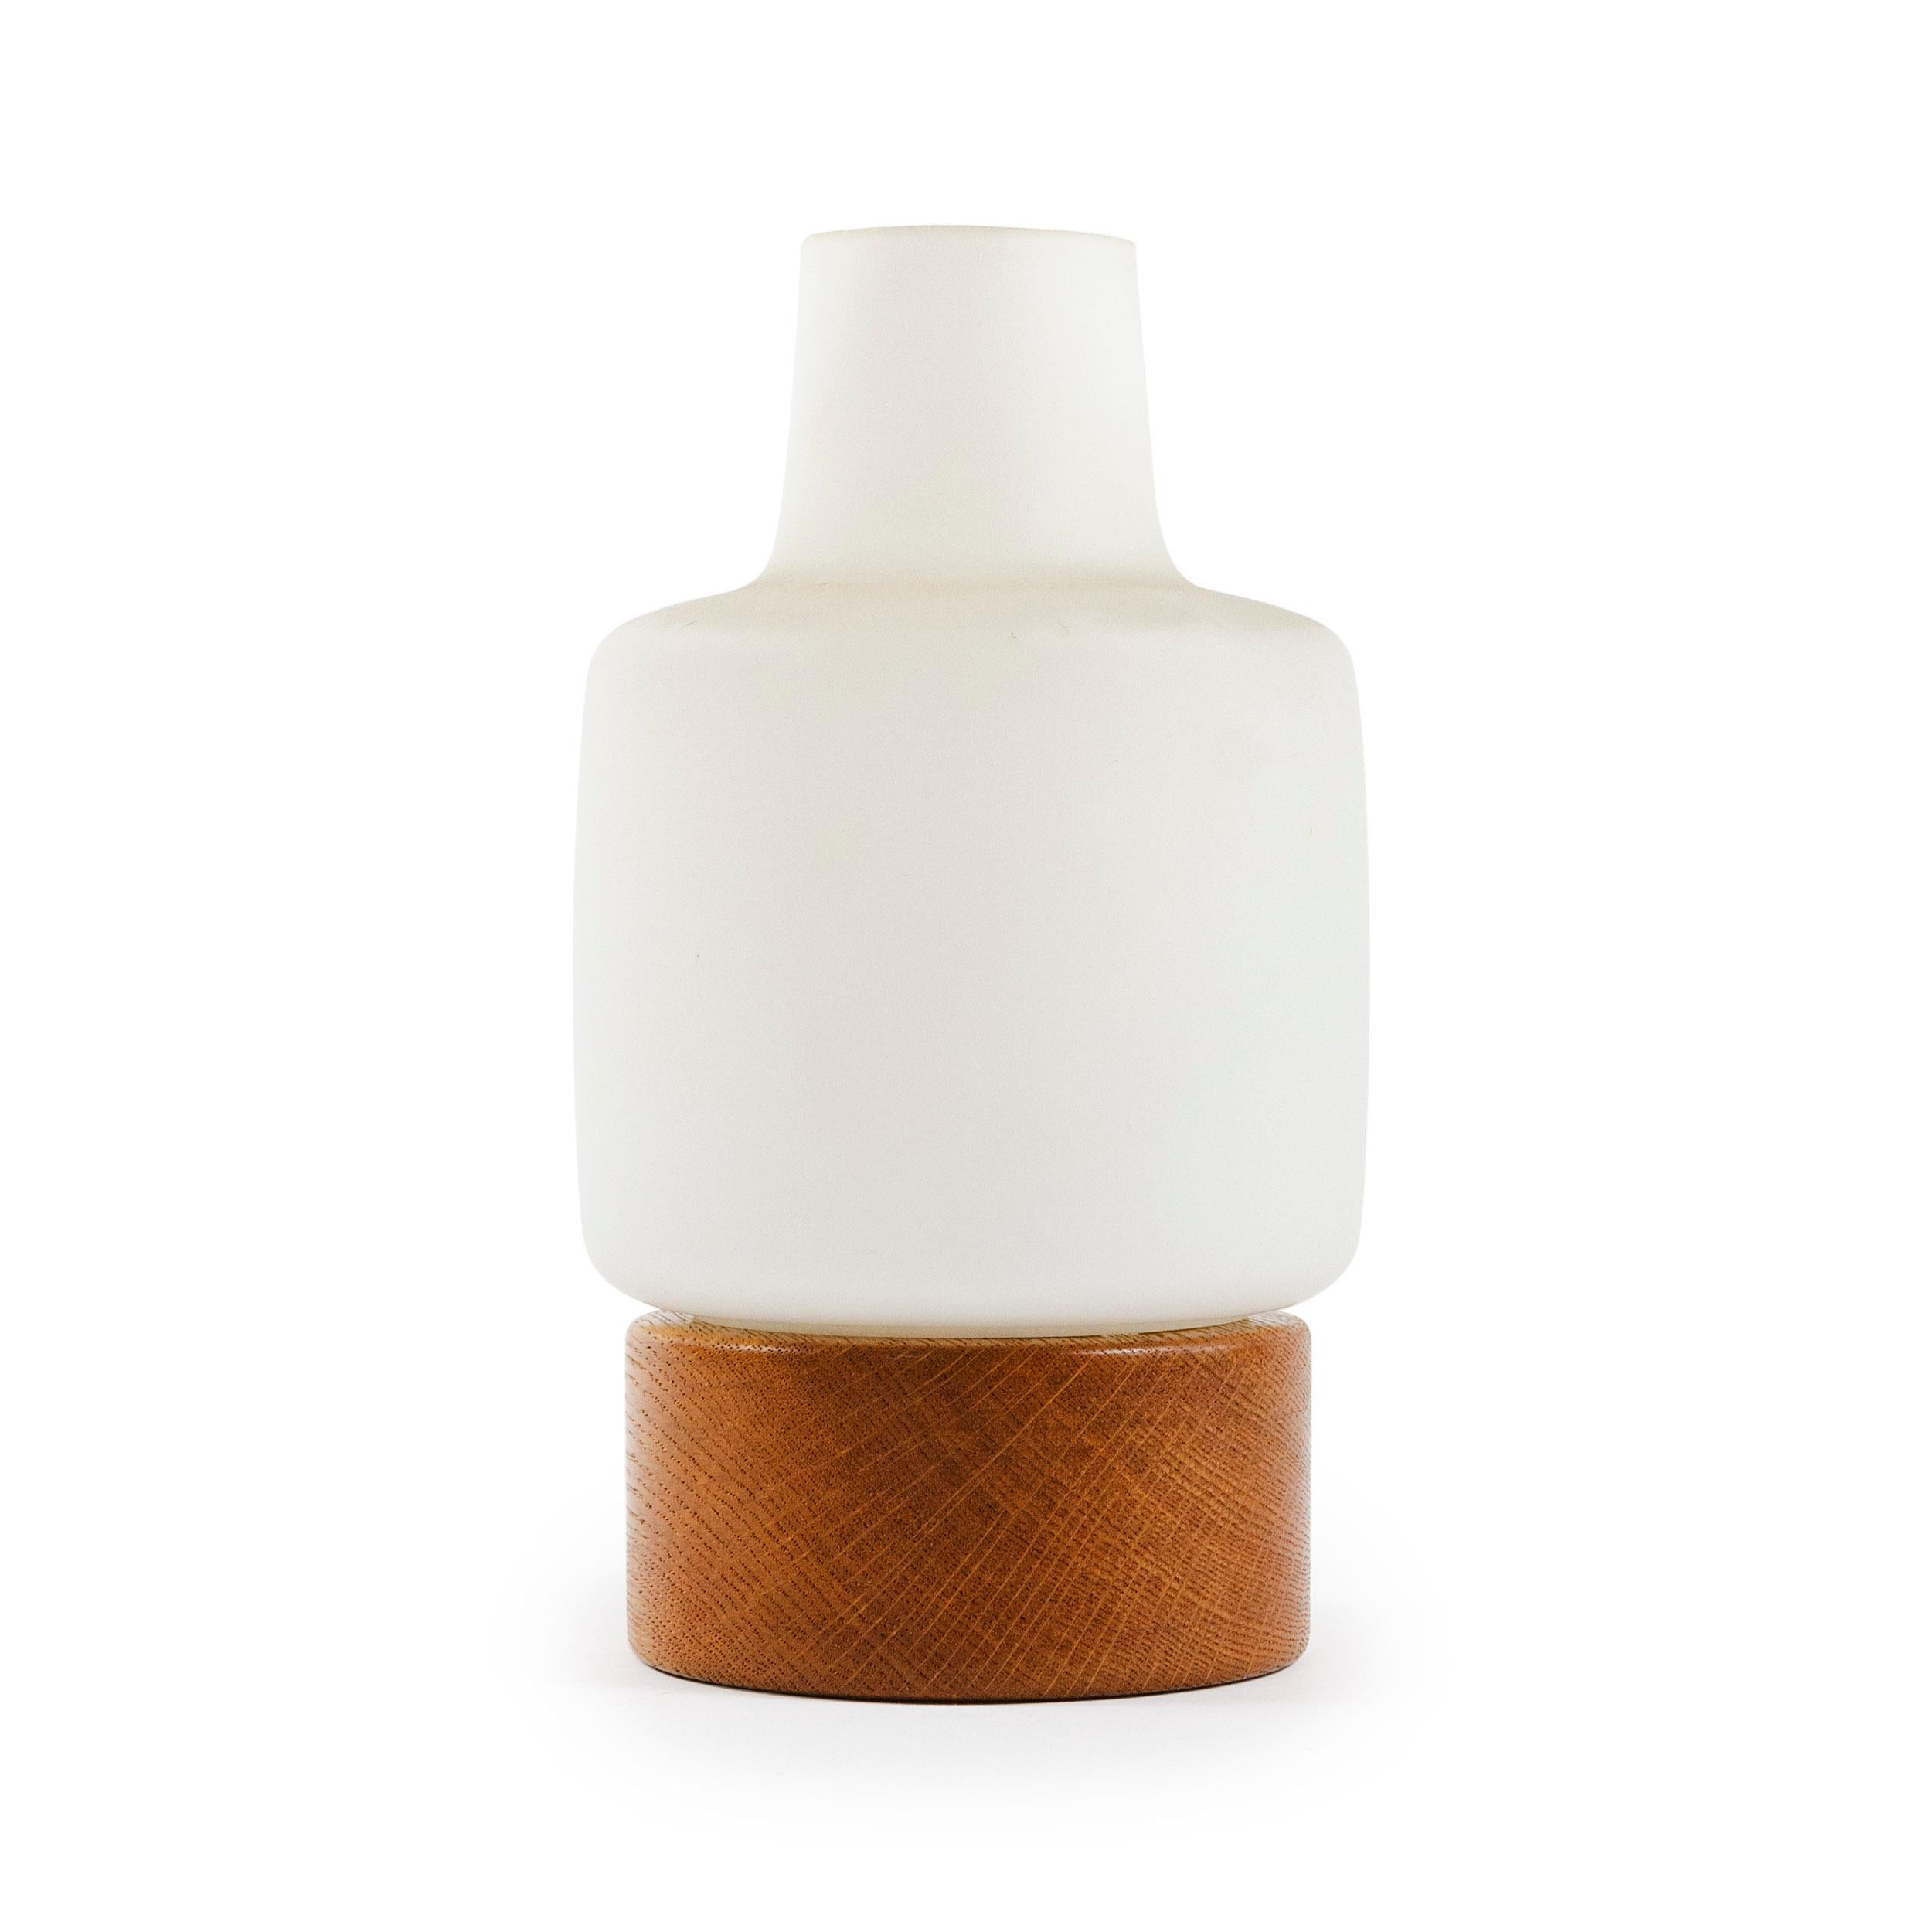 A petite table lamp with a white matte translucent glass shade resting on a rounded oak base.